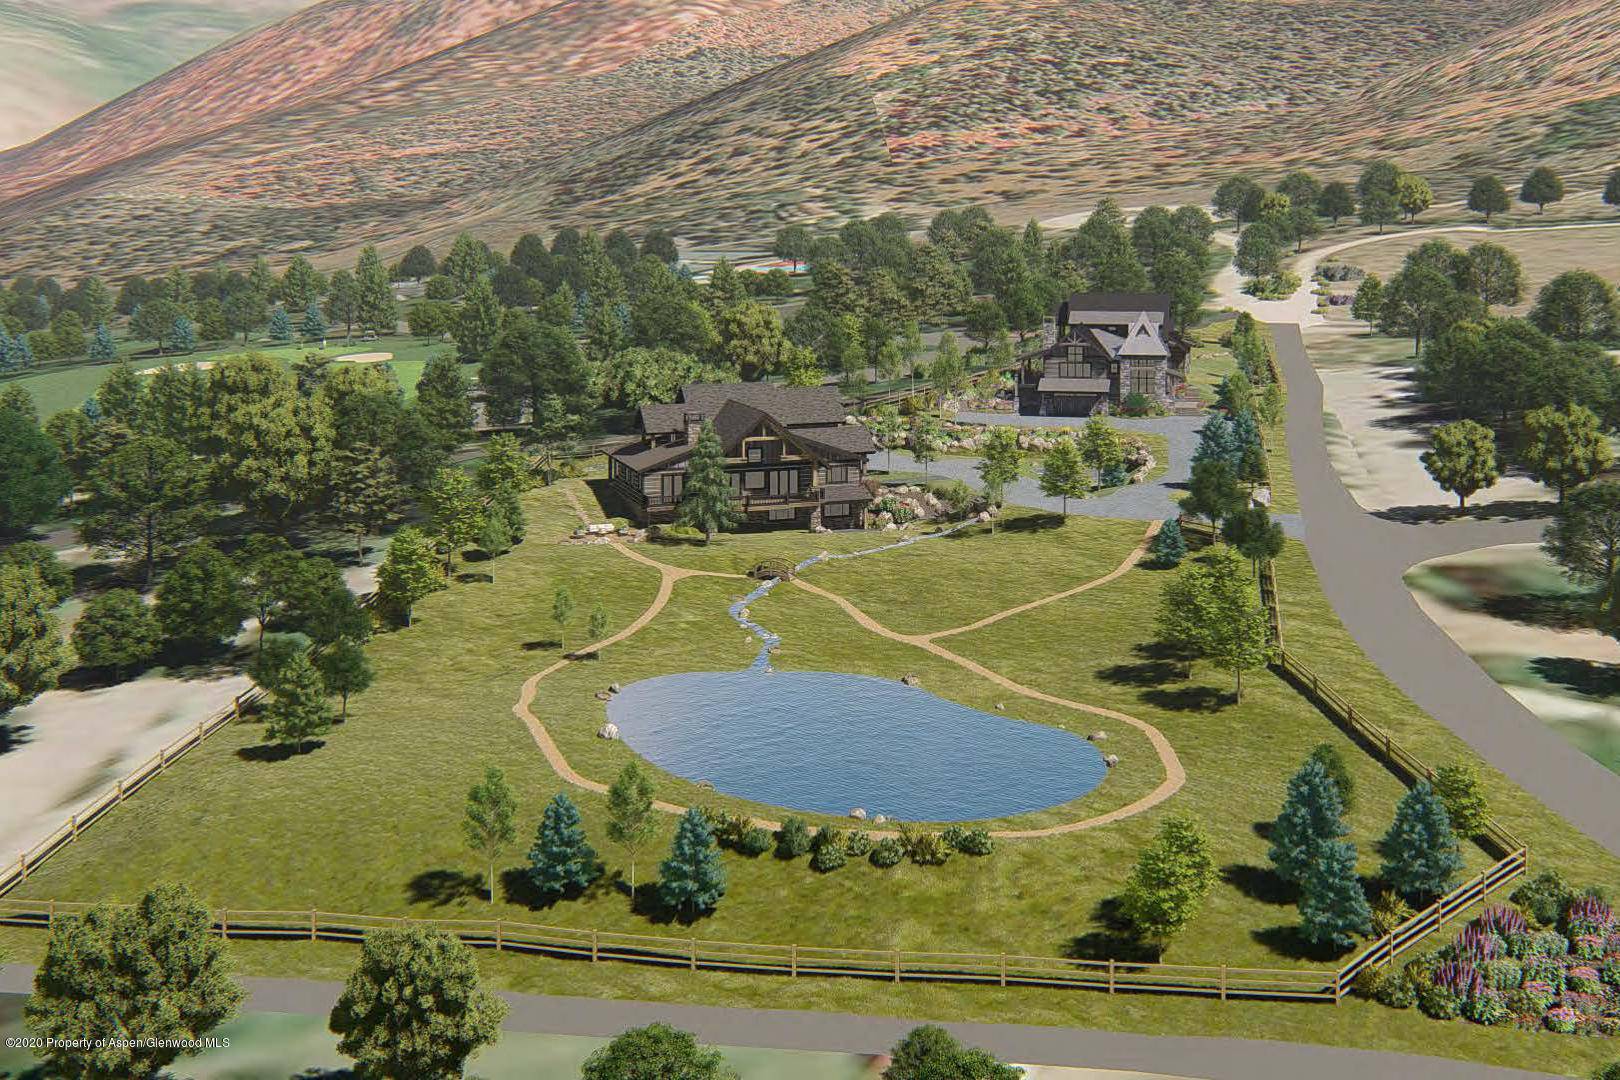 Welcome to Roaring Fork View, 2 luxurious residential lots located adjacent to the Roaring Fork Club.